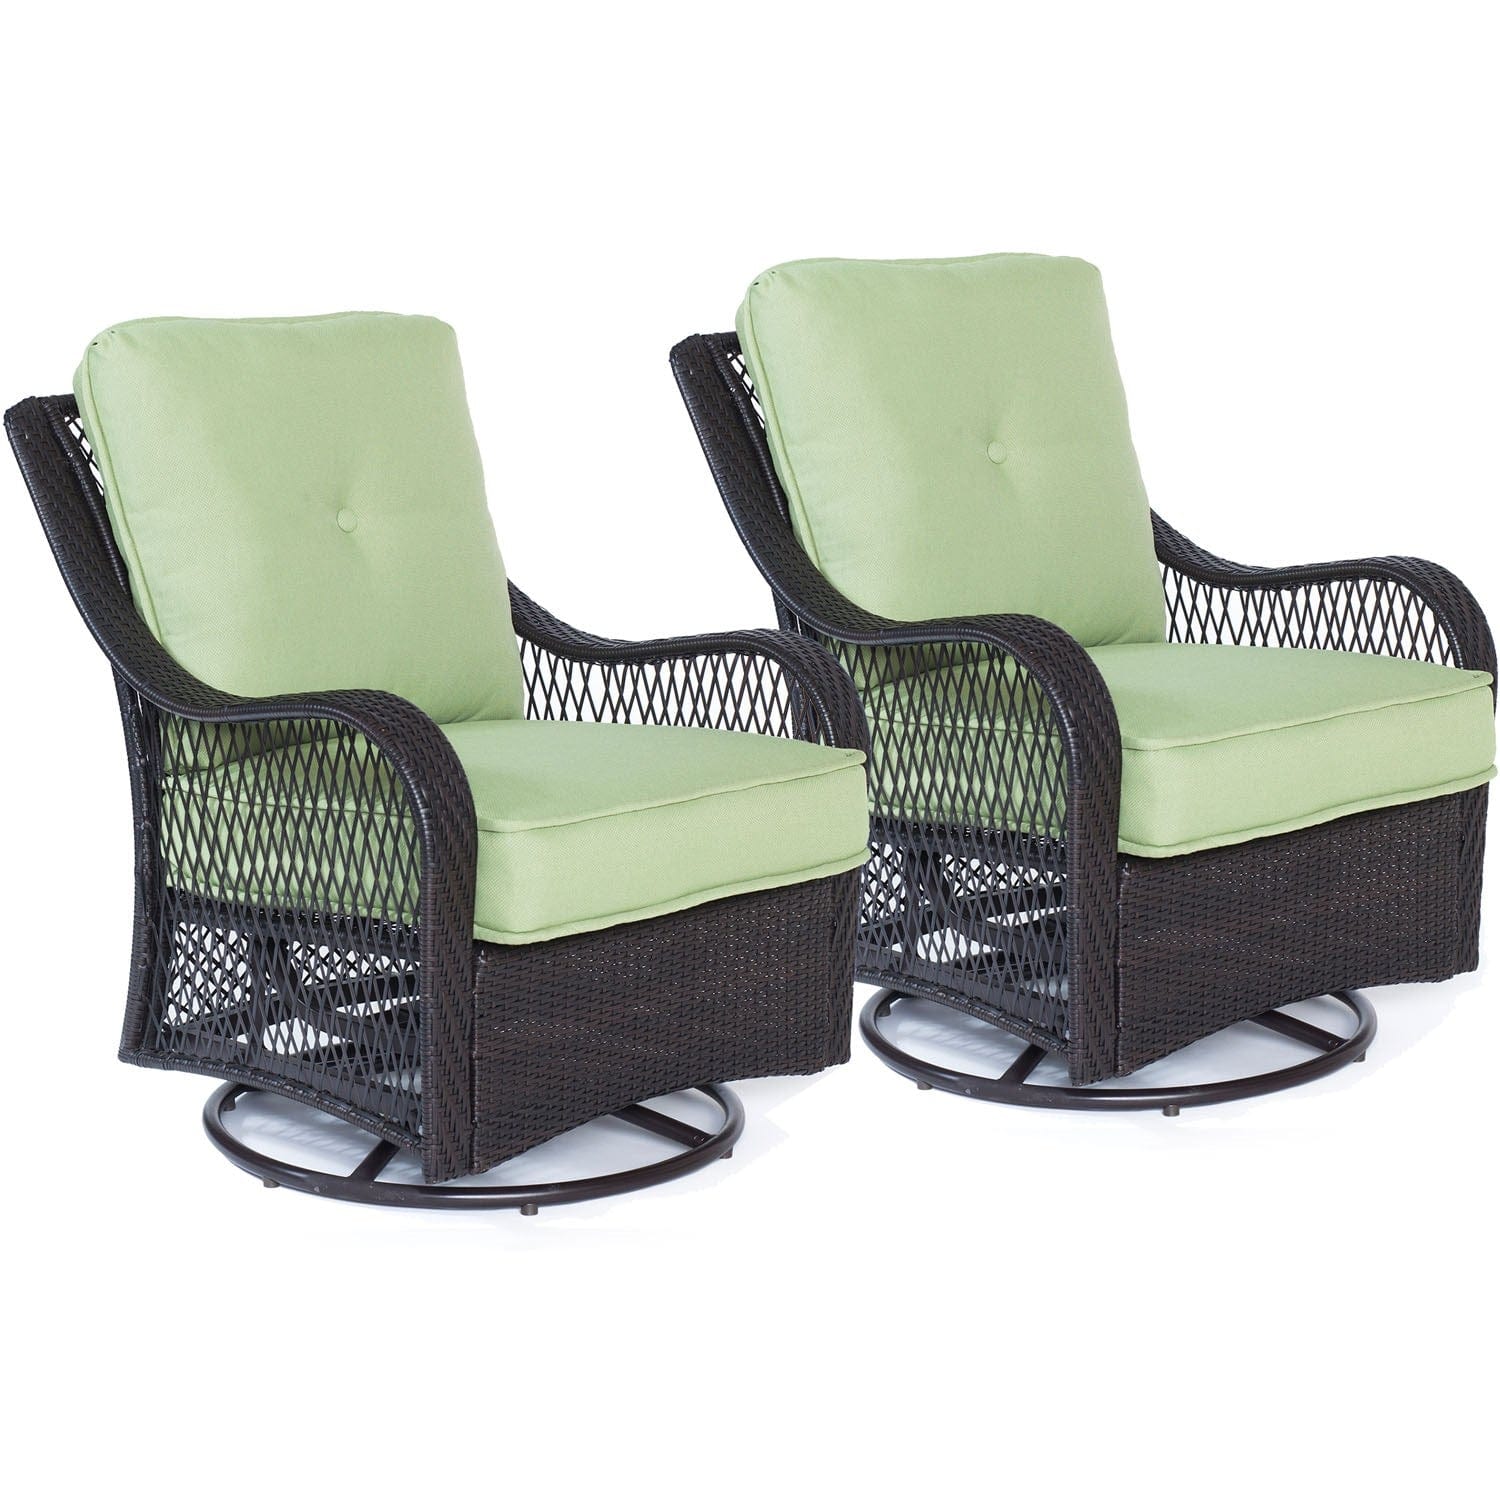 Hanover Fire Pit Chat Set Hanover Orleans 4-Piece Woven Lounge Set in Avocado Green with 2 Woven Swivel Gliders, Sofa, and 40,000 BTU Tile-Top Fire Pit Table